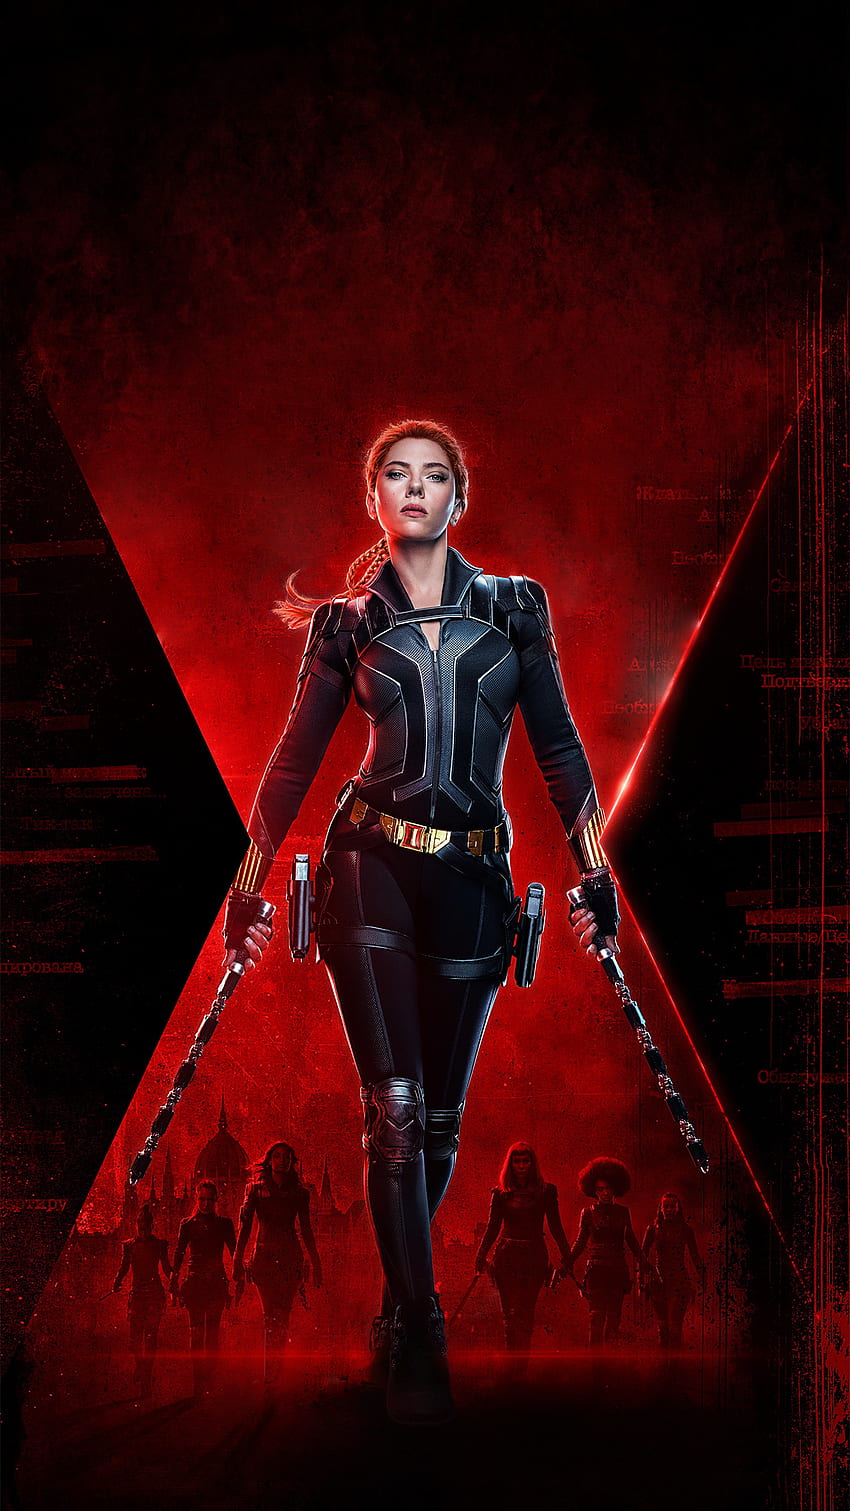 Black Widow Lock Screen iPhone 7+, link in comments for Homescreen as ...